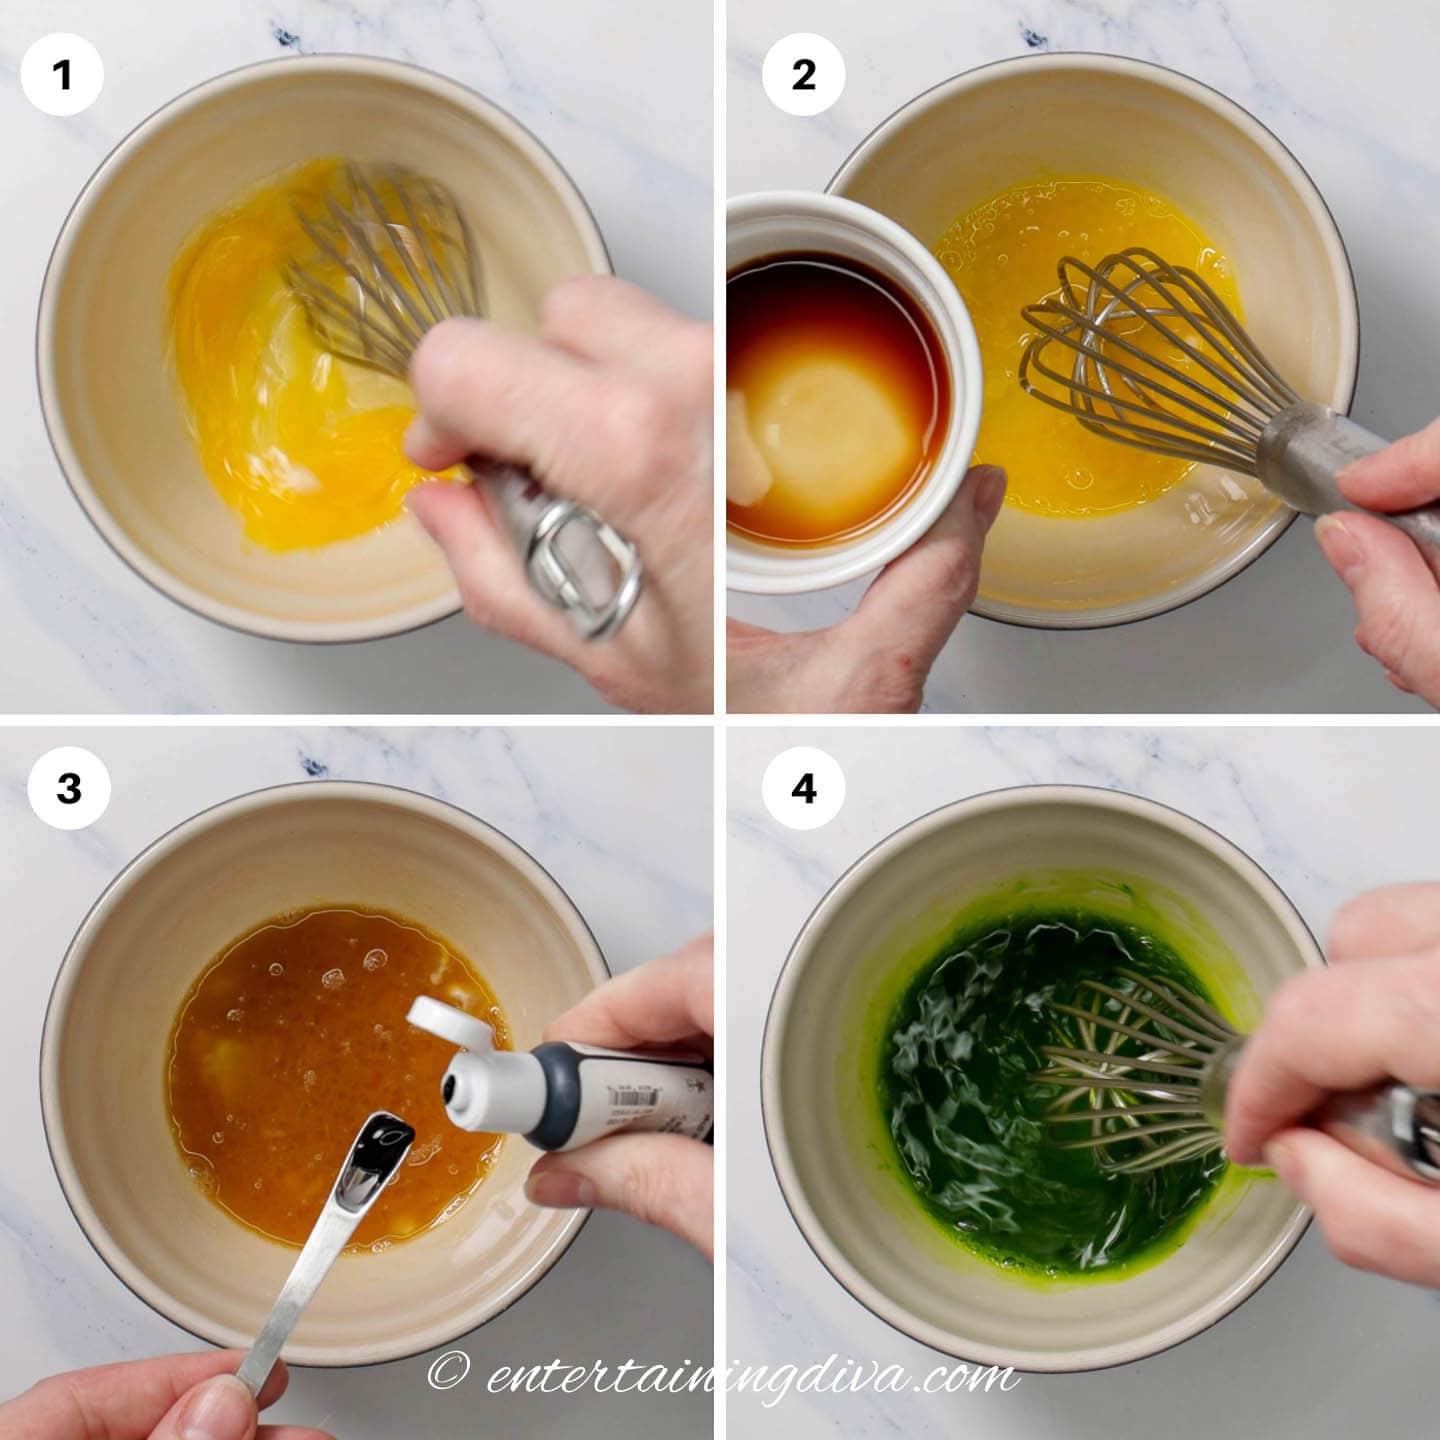 How to mix the eggs, flavoring and green food coloring with a whisk